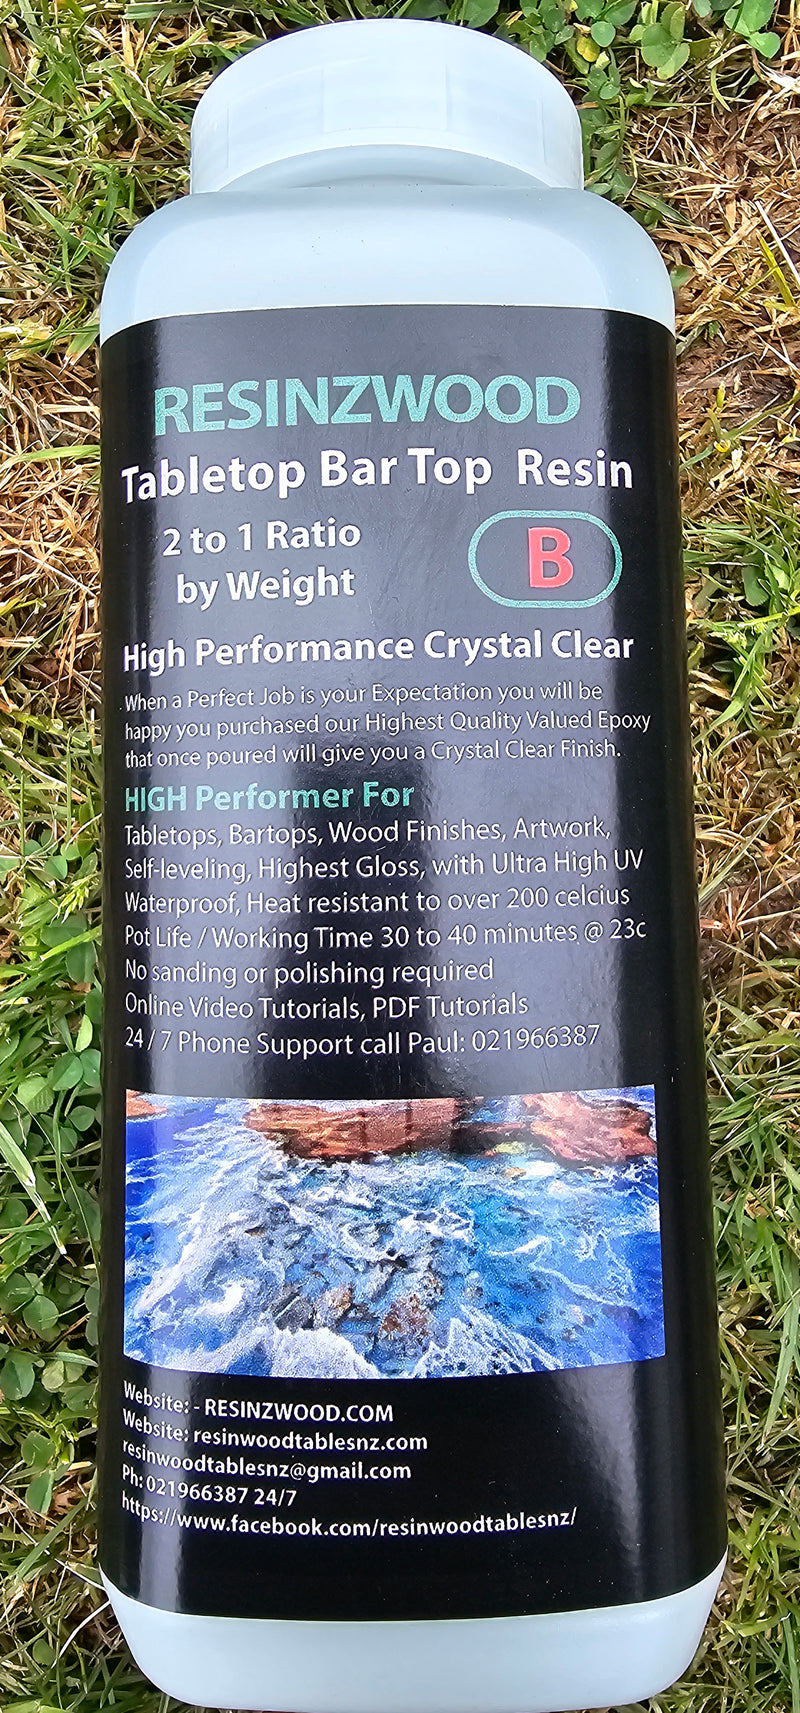 RESINZWOOD Crystal Clear Tabletop Resin, 2 to 1 by Weight